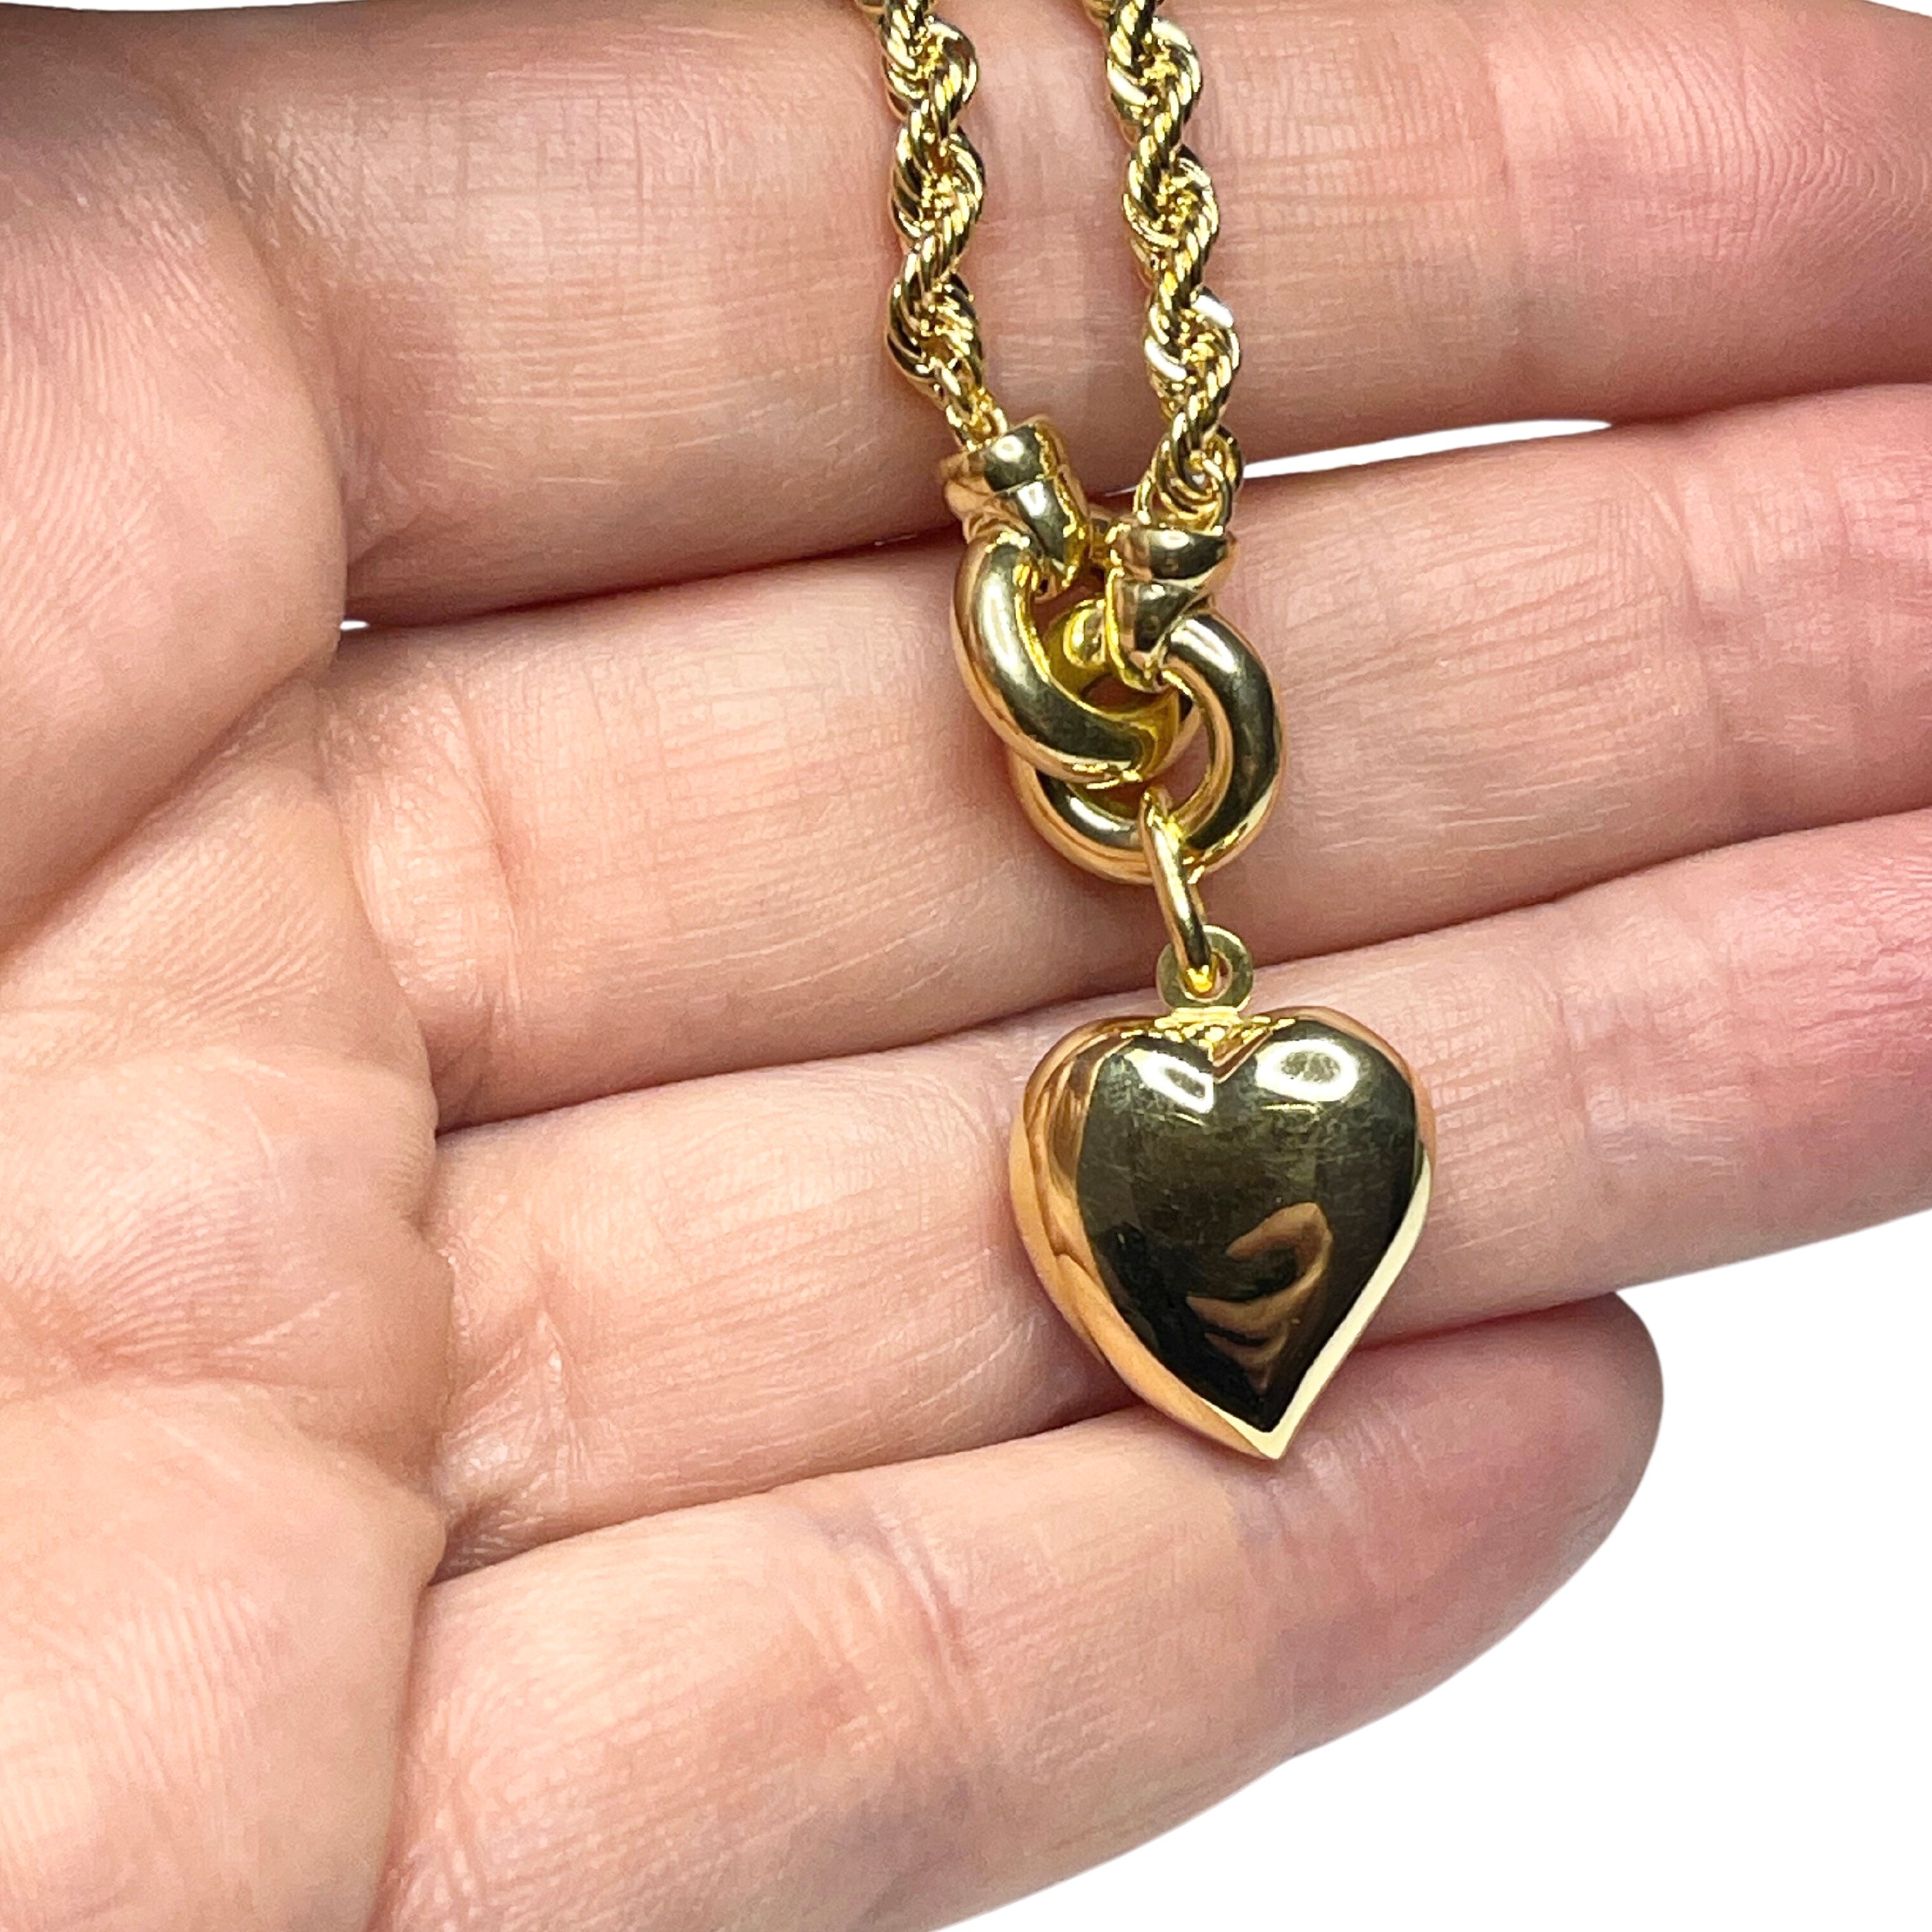 Rope necklace with hanging heart